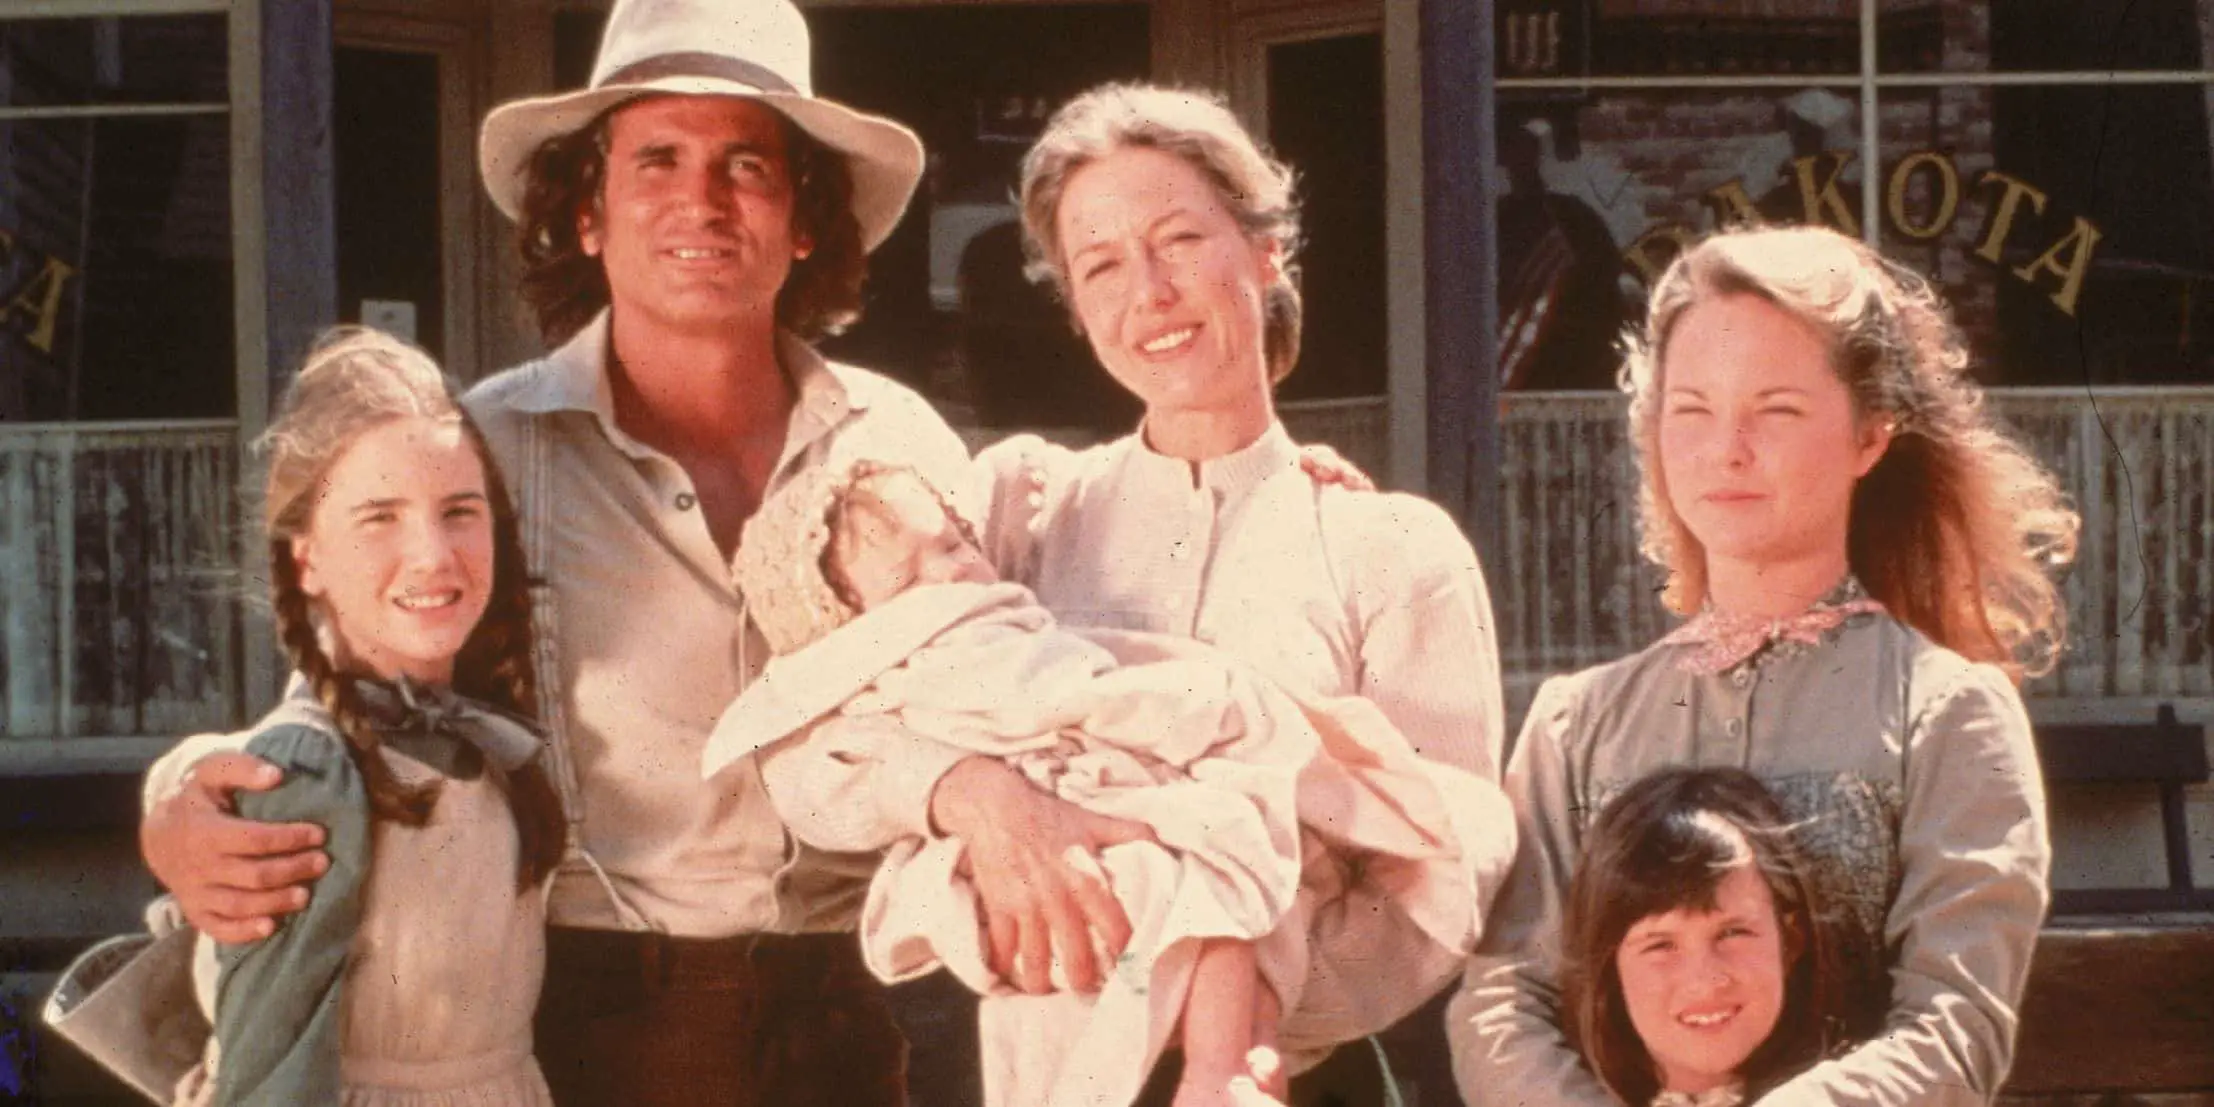 Little House on the Prairie was something of a melodrama, but it often got its history right.